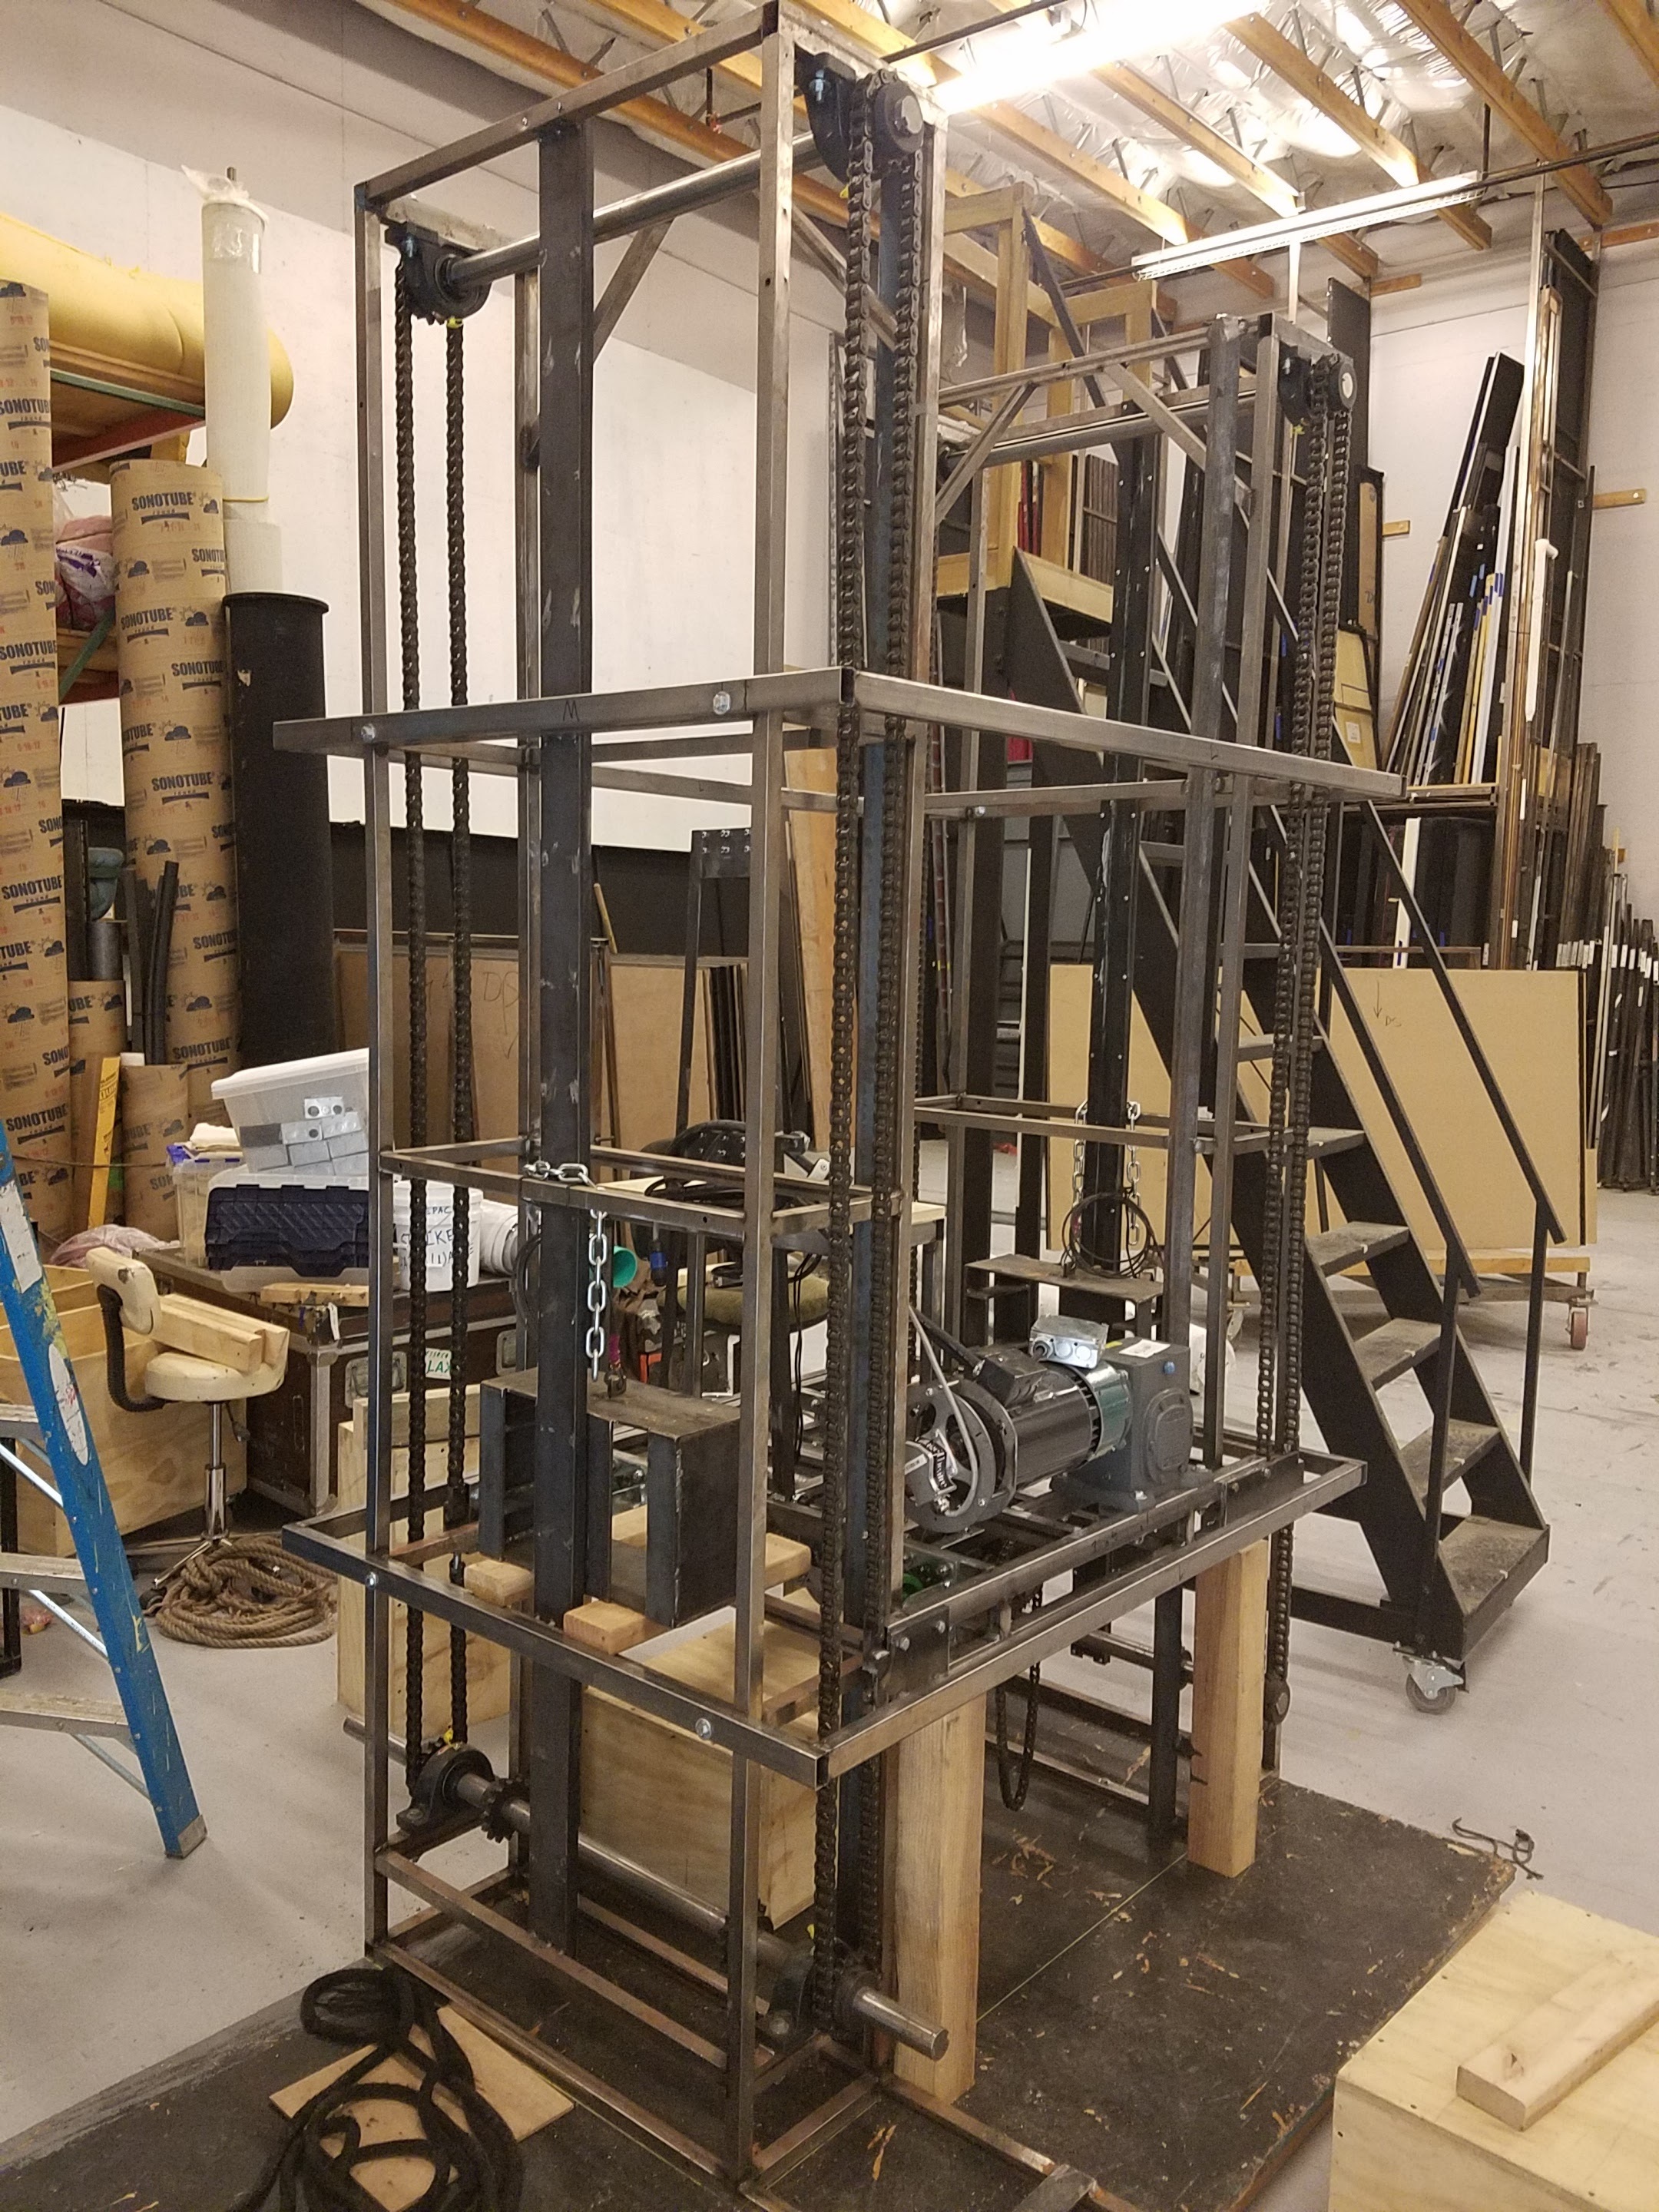   The 39 Steps  elevator in the dry-fit stage. 